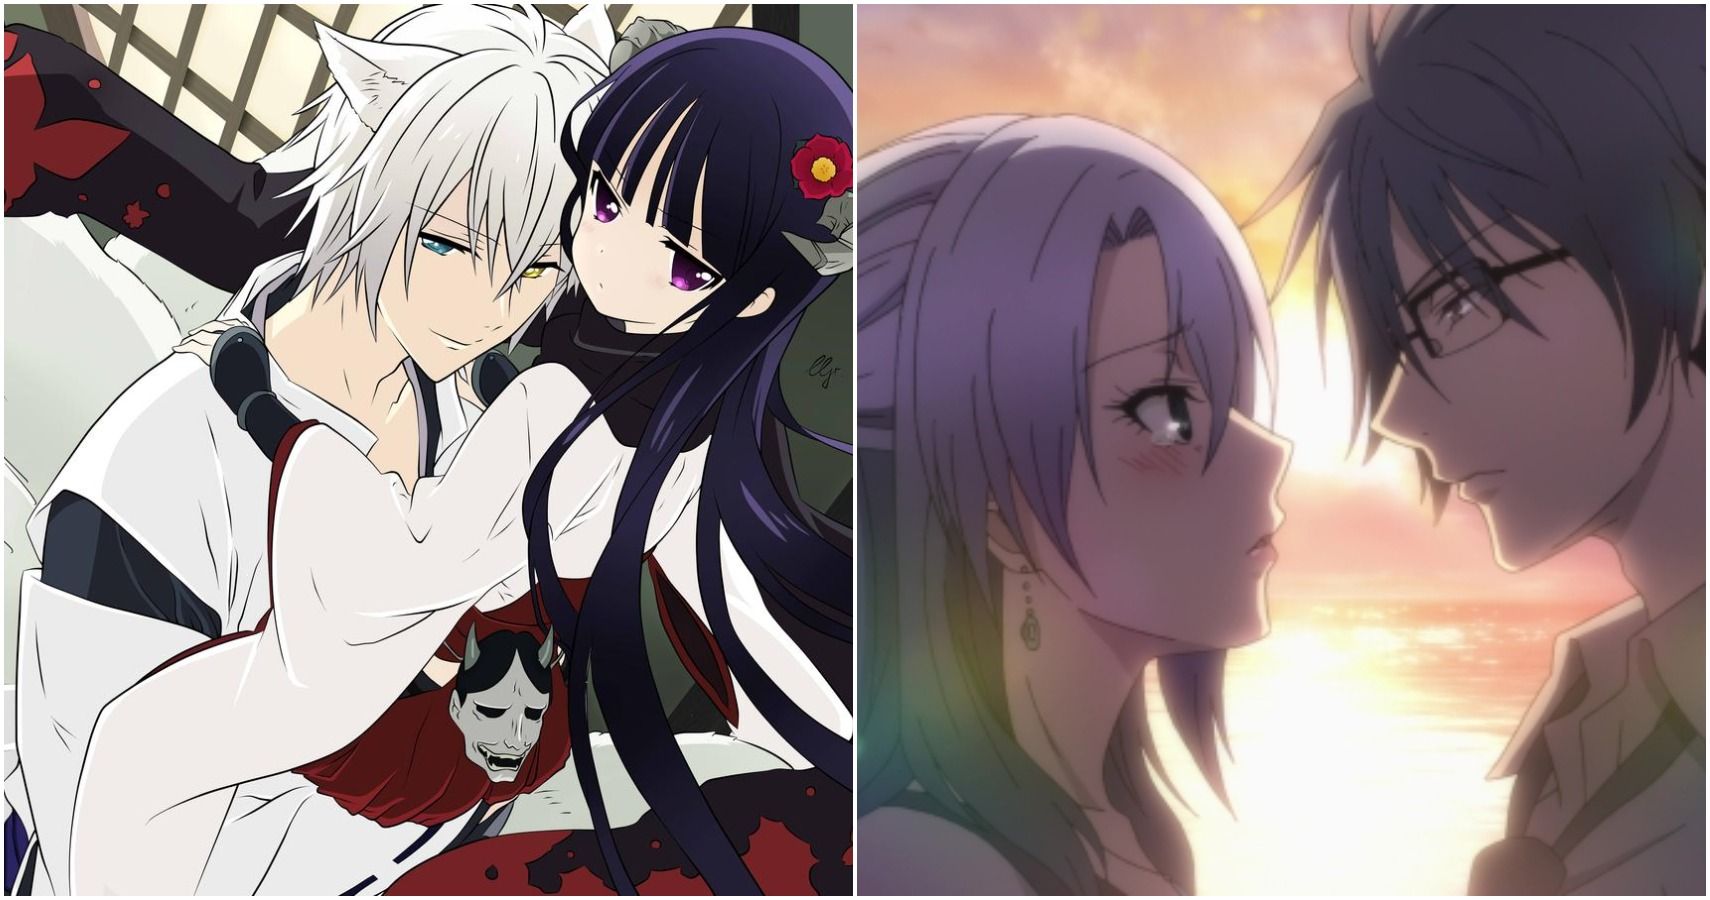 What Romance Anime Should You Watch Depending On Your Zodiac Sign?